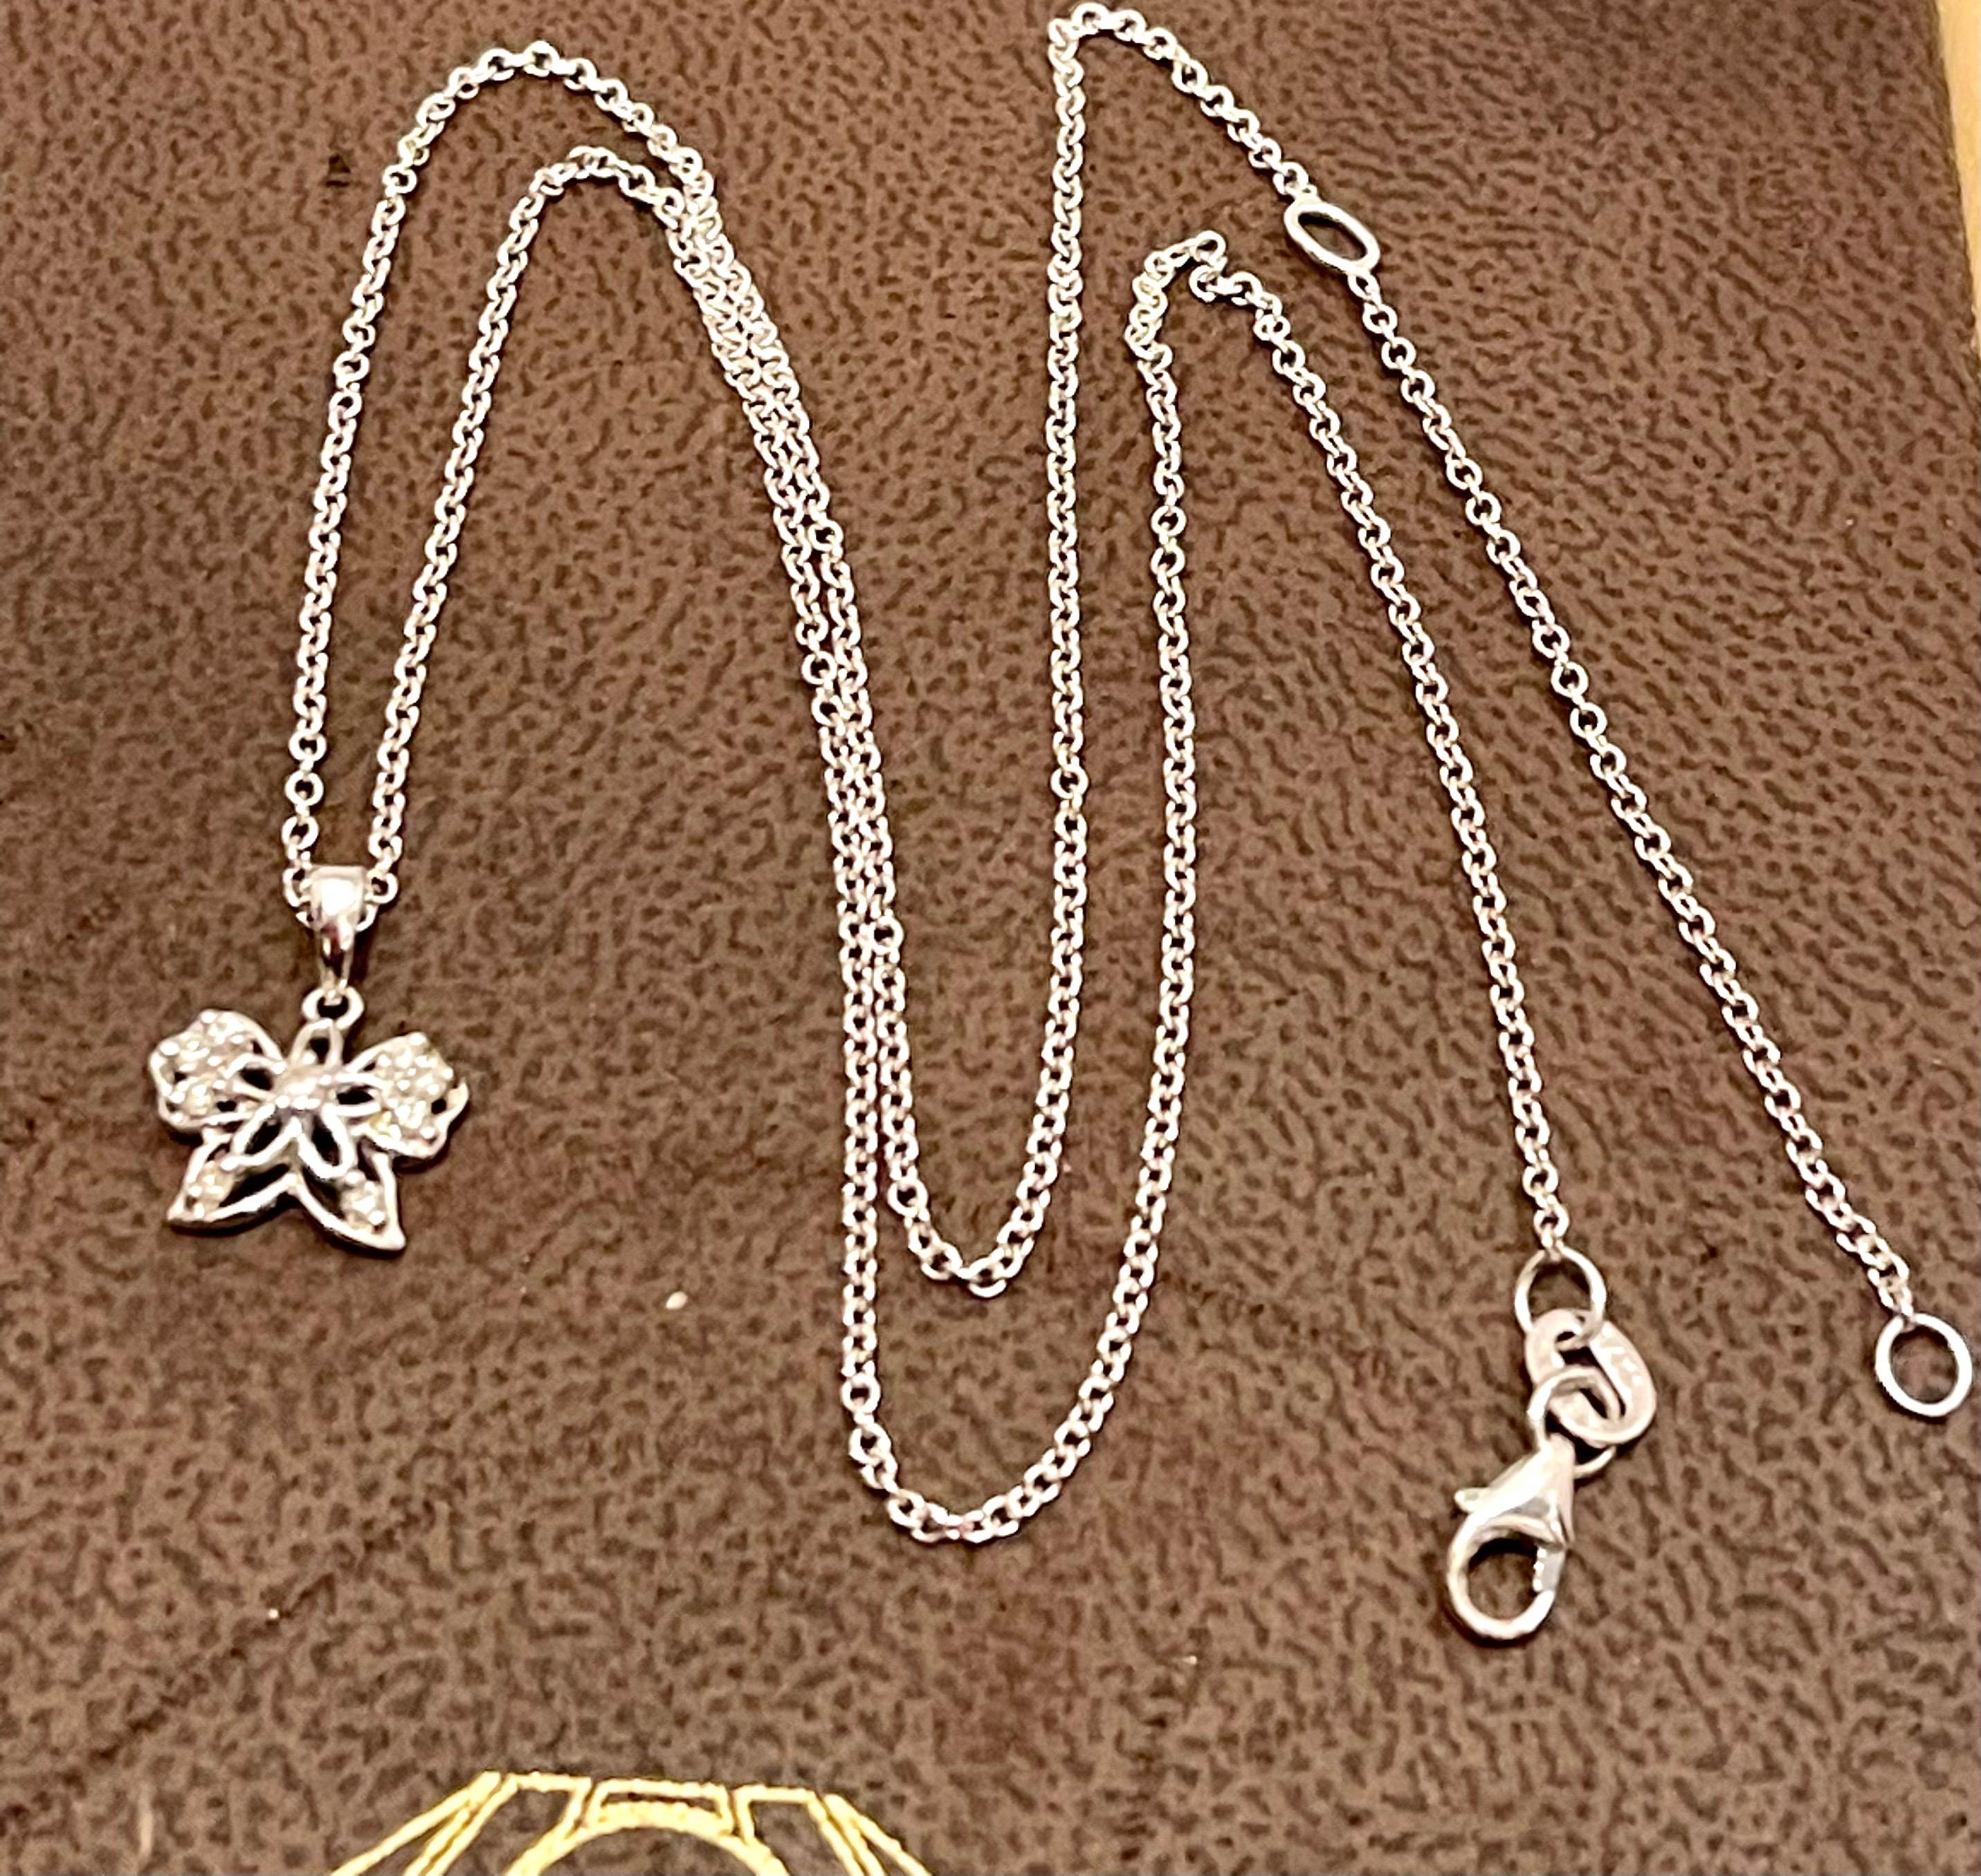 18 Karat Gold Butterfly Pendant with White Diamond & 14 Karat White Gold Chain In Excellent Condition For Sale In New York, NY